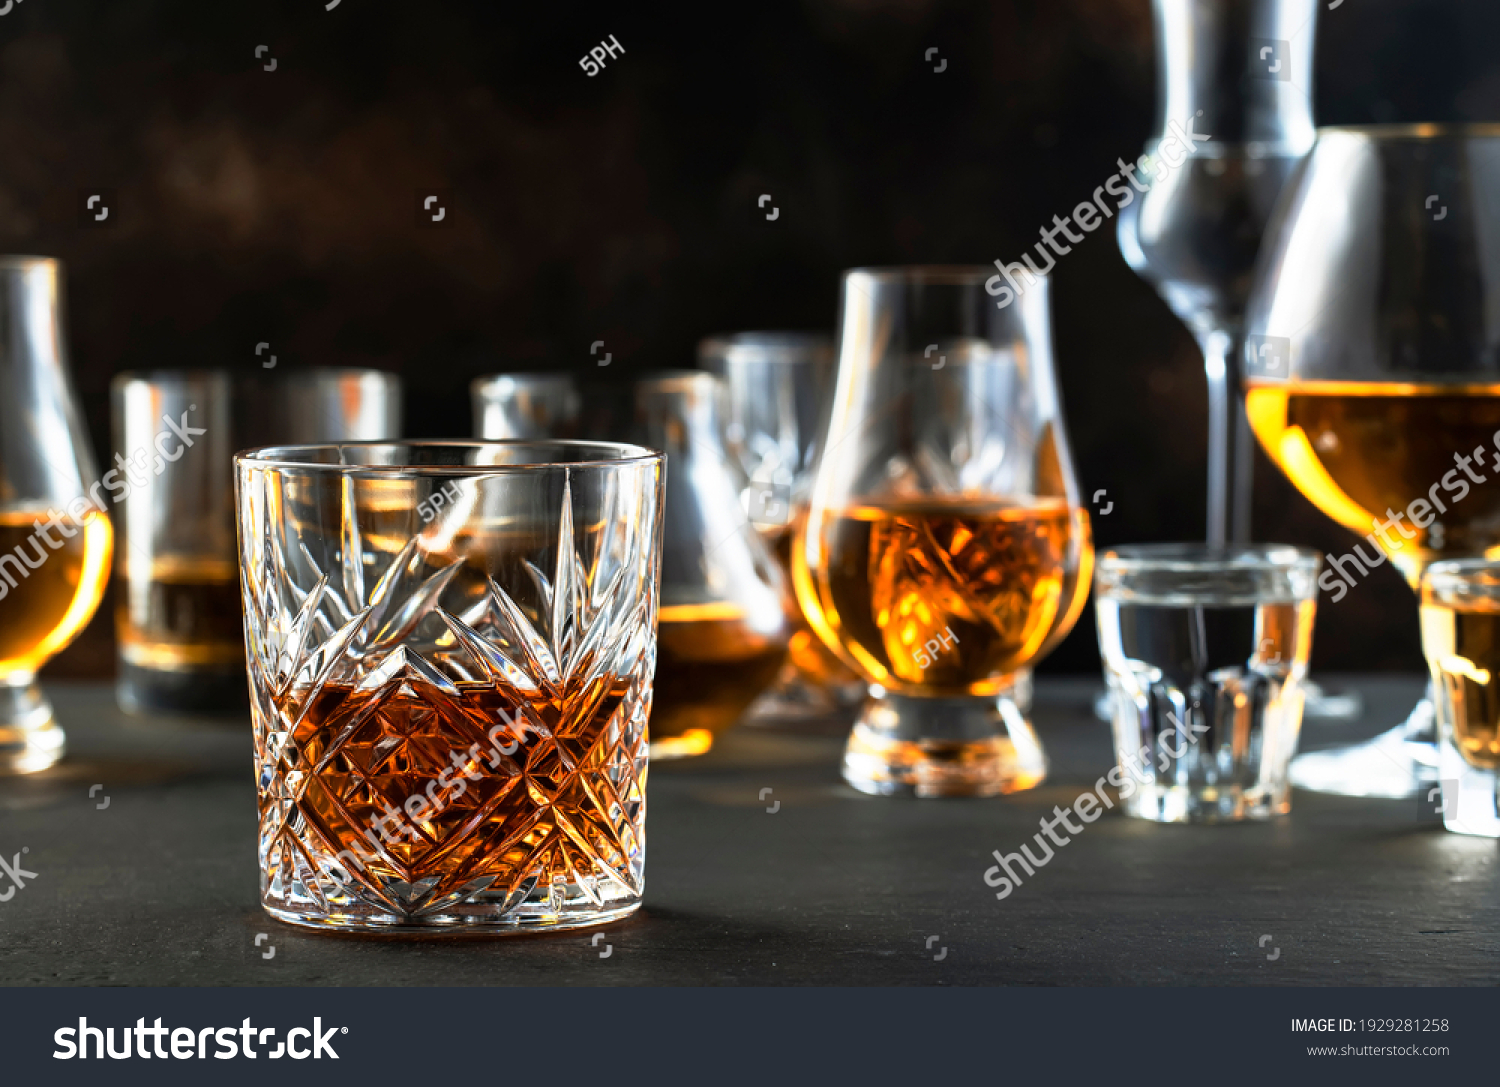 Hard strong alcoholic drinks and distillates in glasses in assortment: vodka, cognac, tequila, scotch, brandy and whiskey, grappa, liqueur, vermouth, tincture, rum. Brown background #1929281258